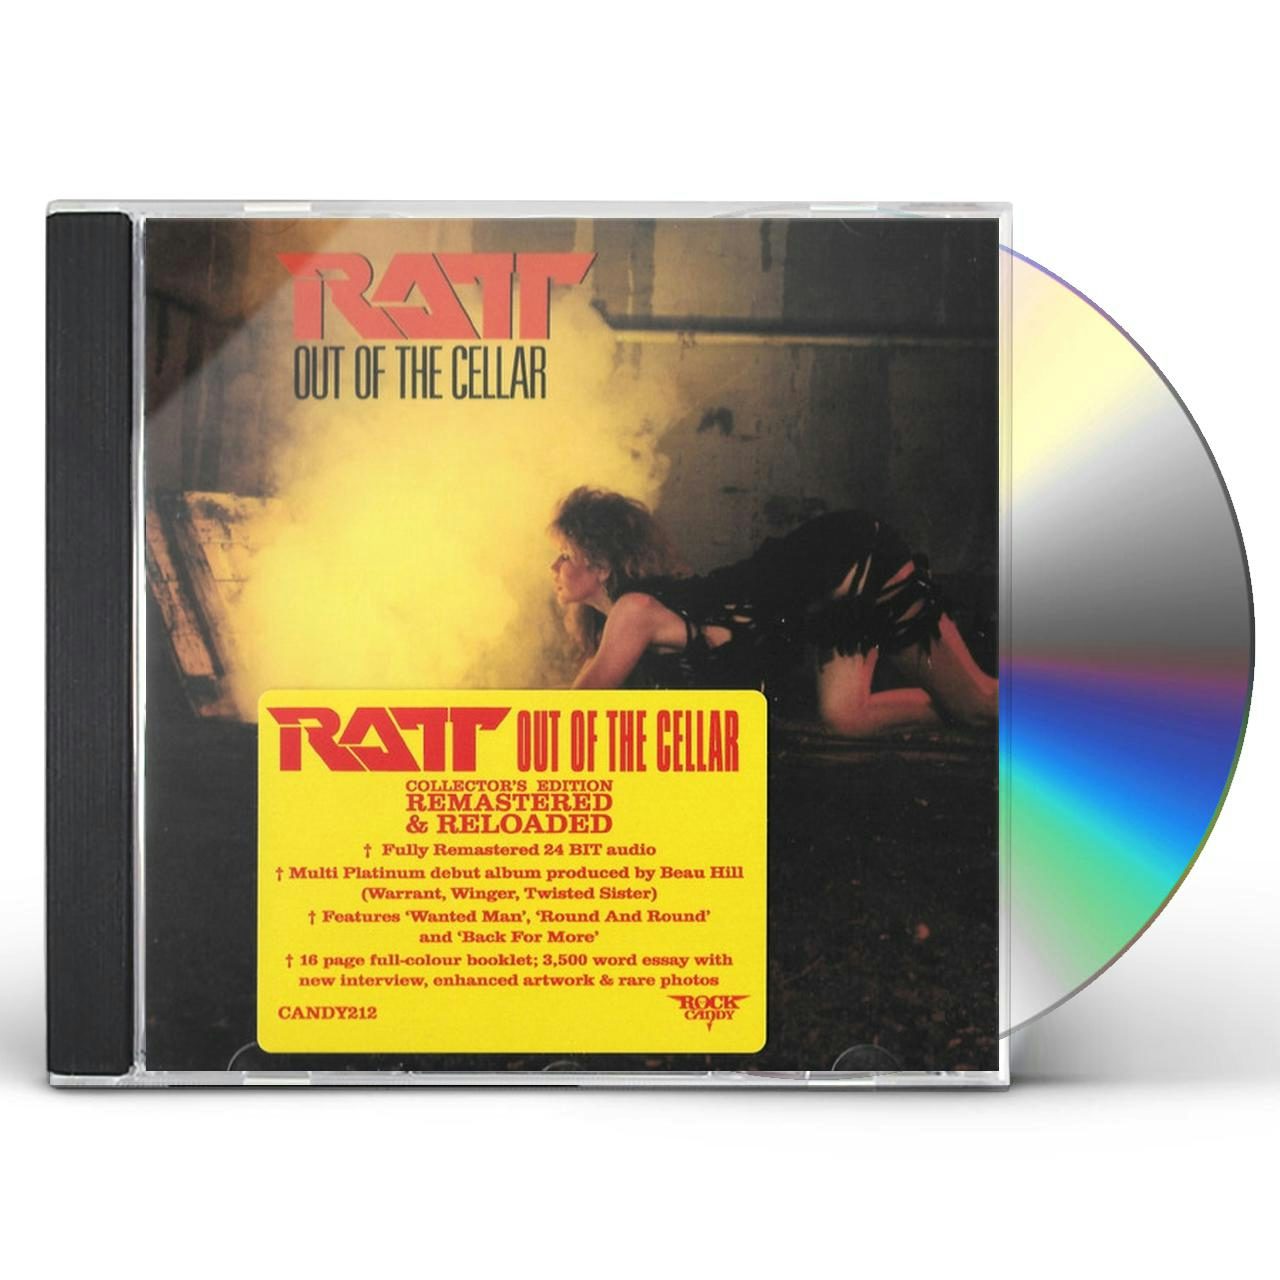 Ratt OUT OF THE CELLAR CD $19.99$17.99